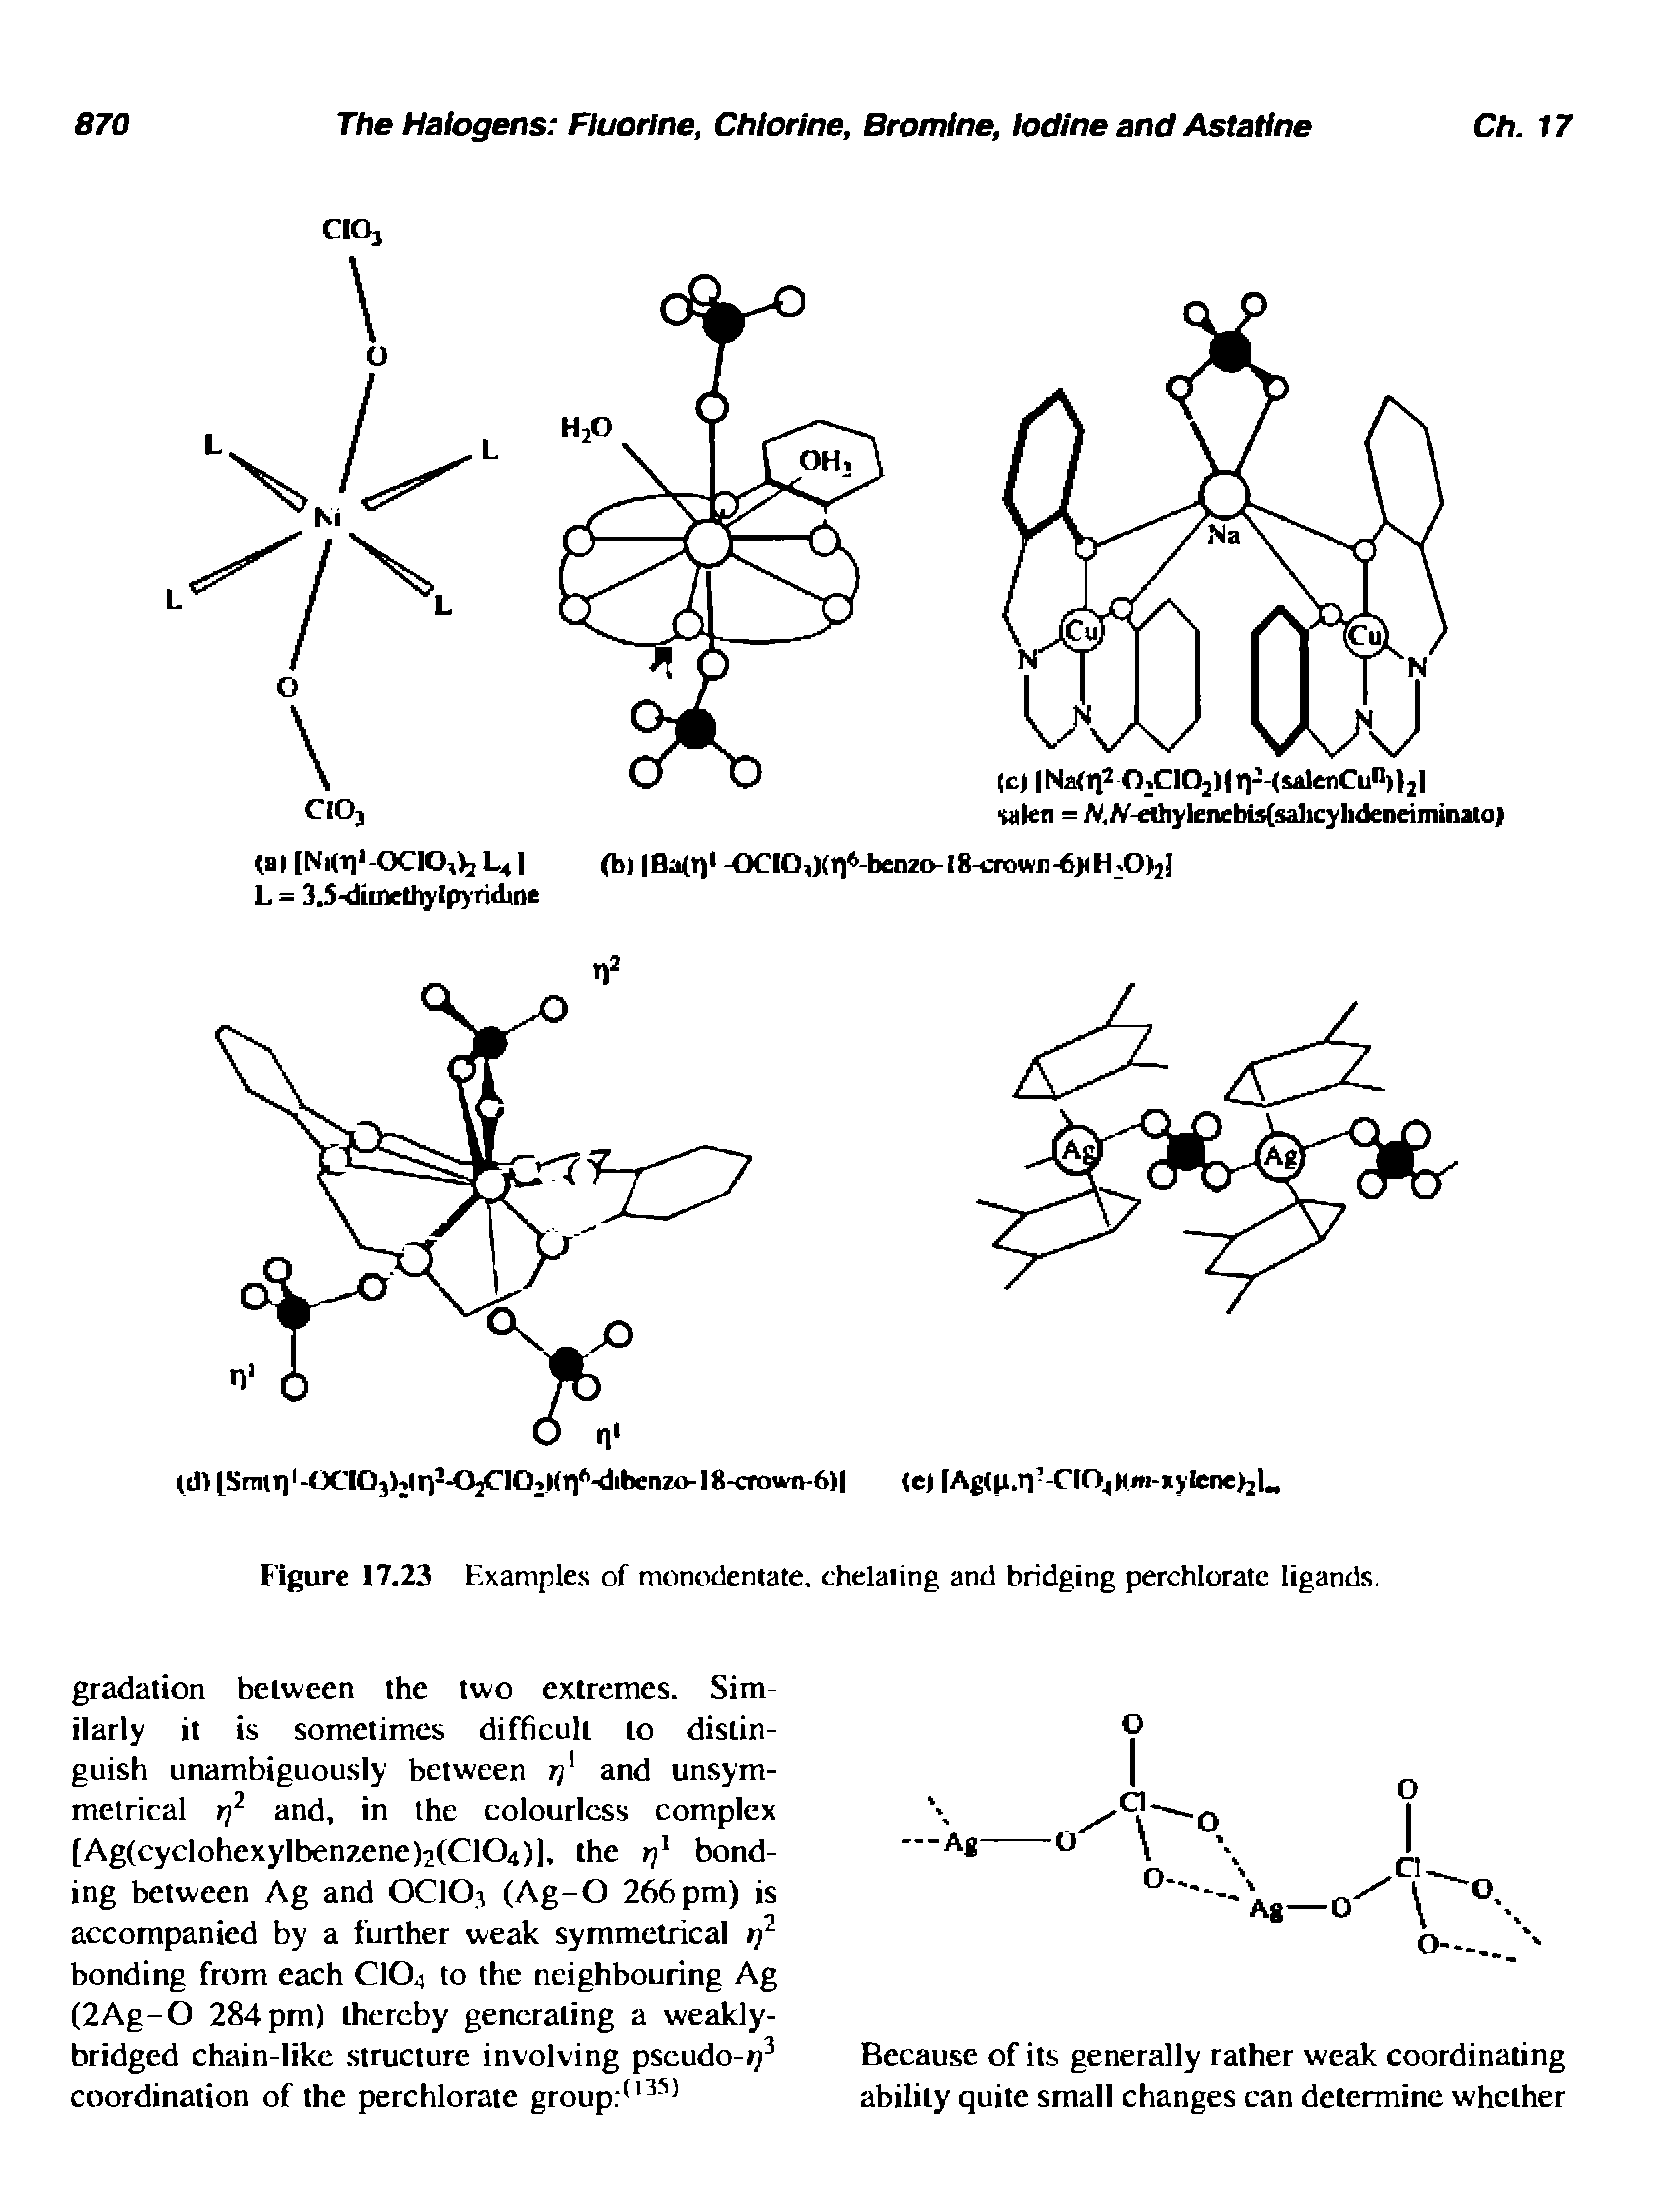 Figure 17.23 F.xamples of monodentate. ehelaiing and bridging perchlorate ligands.